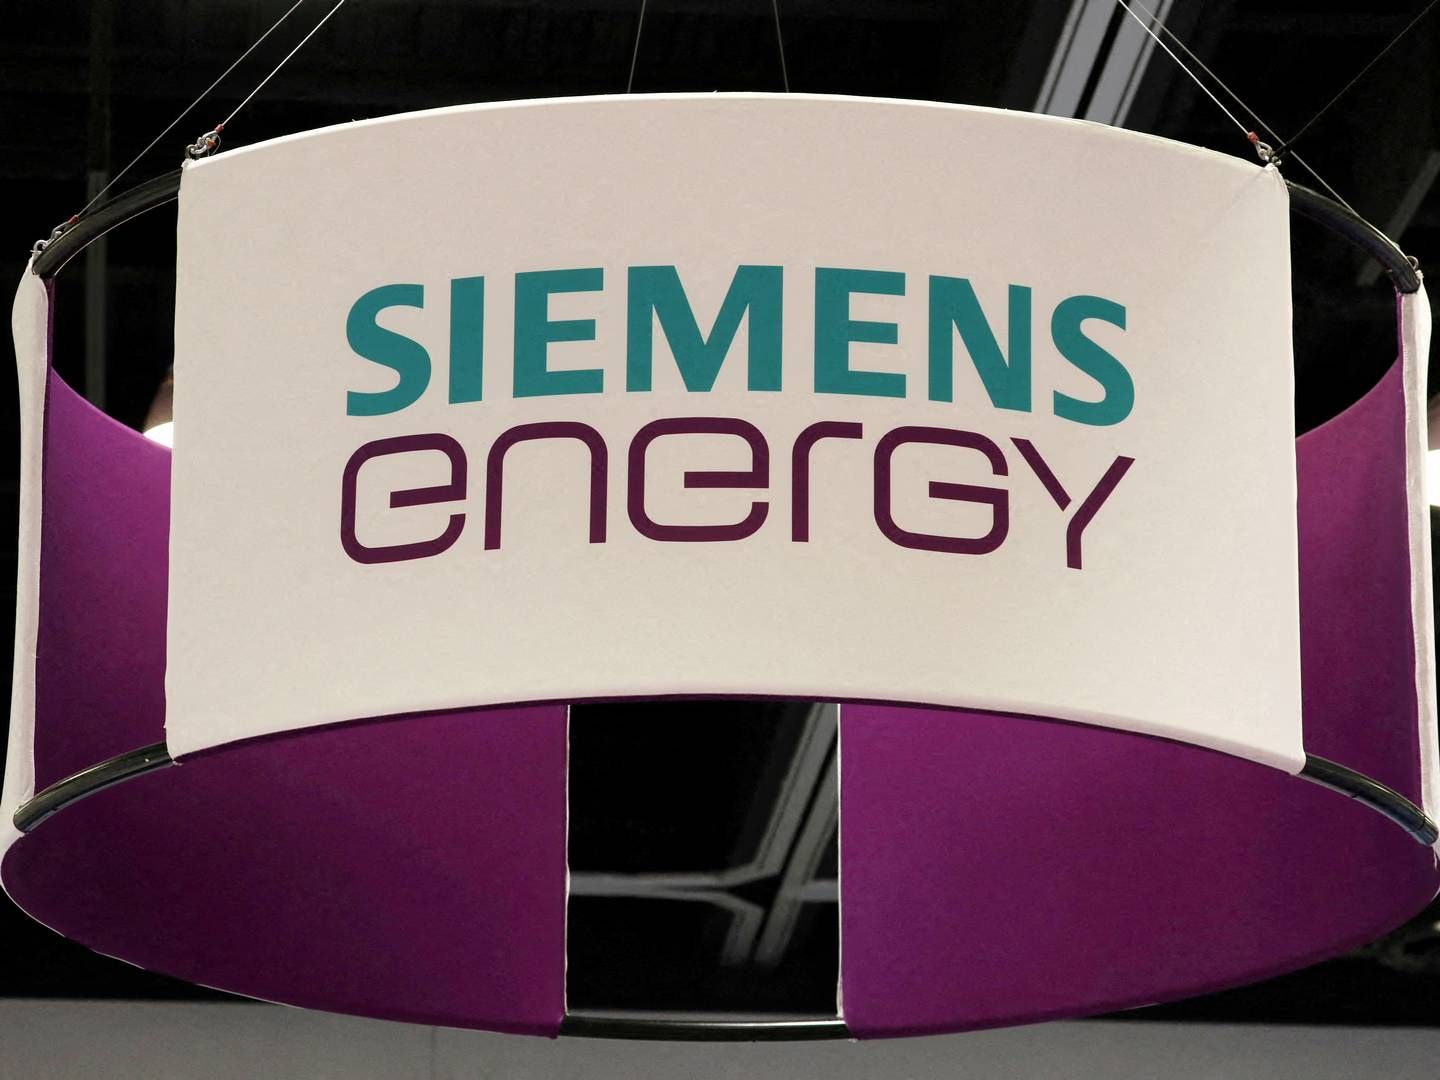 The guarantees were not expected until Siemens Energy’s annual report on Wednesday. | Photo: Chris Helgren